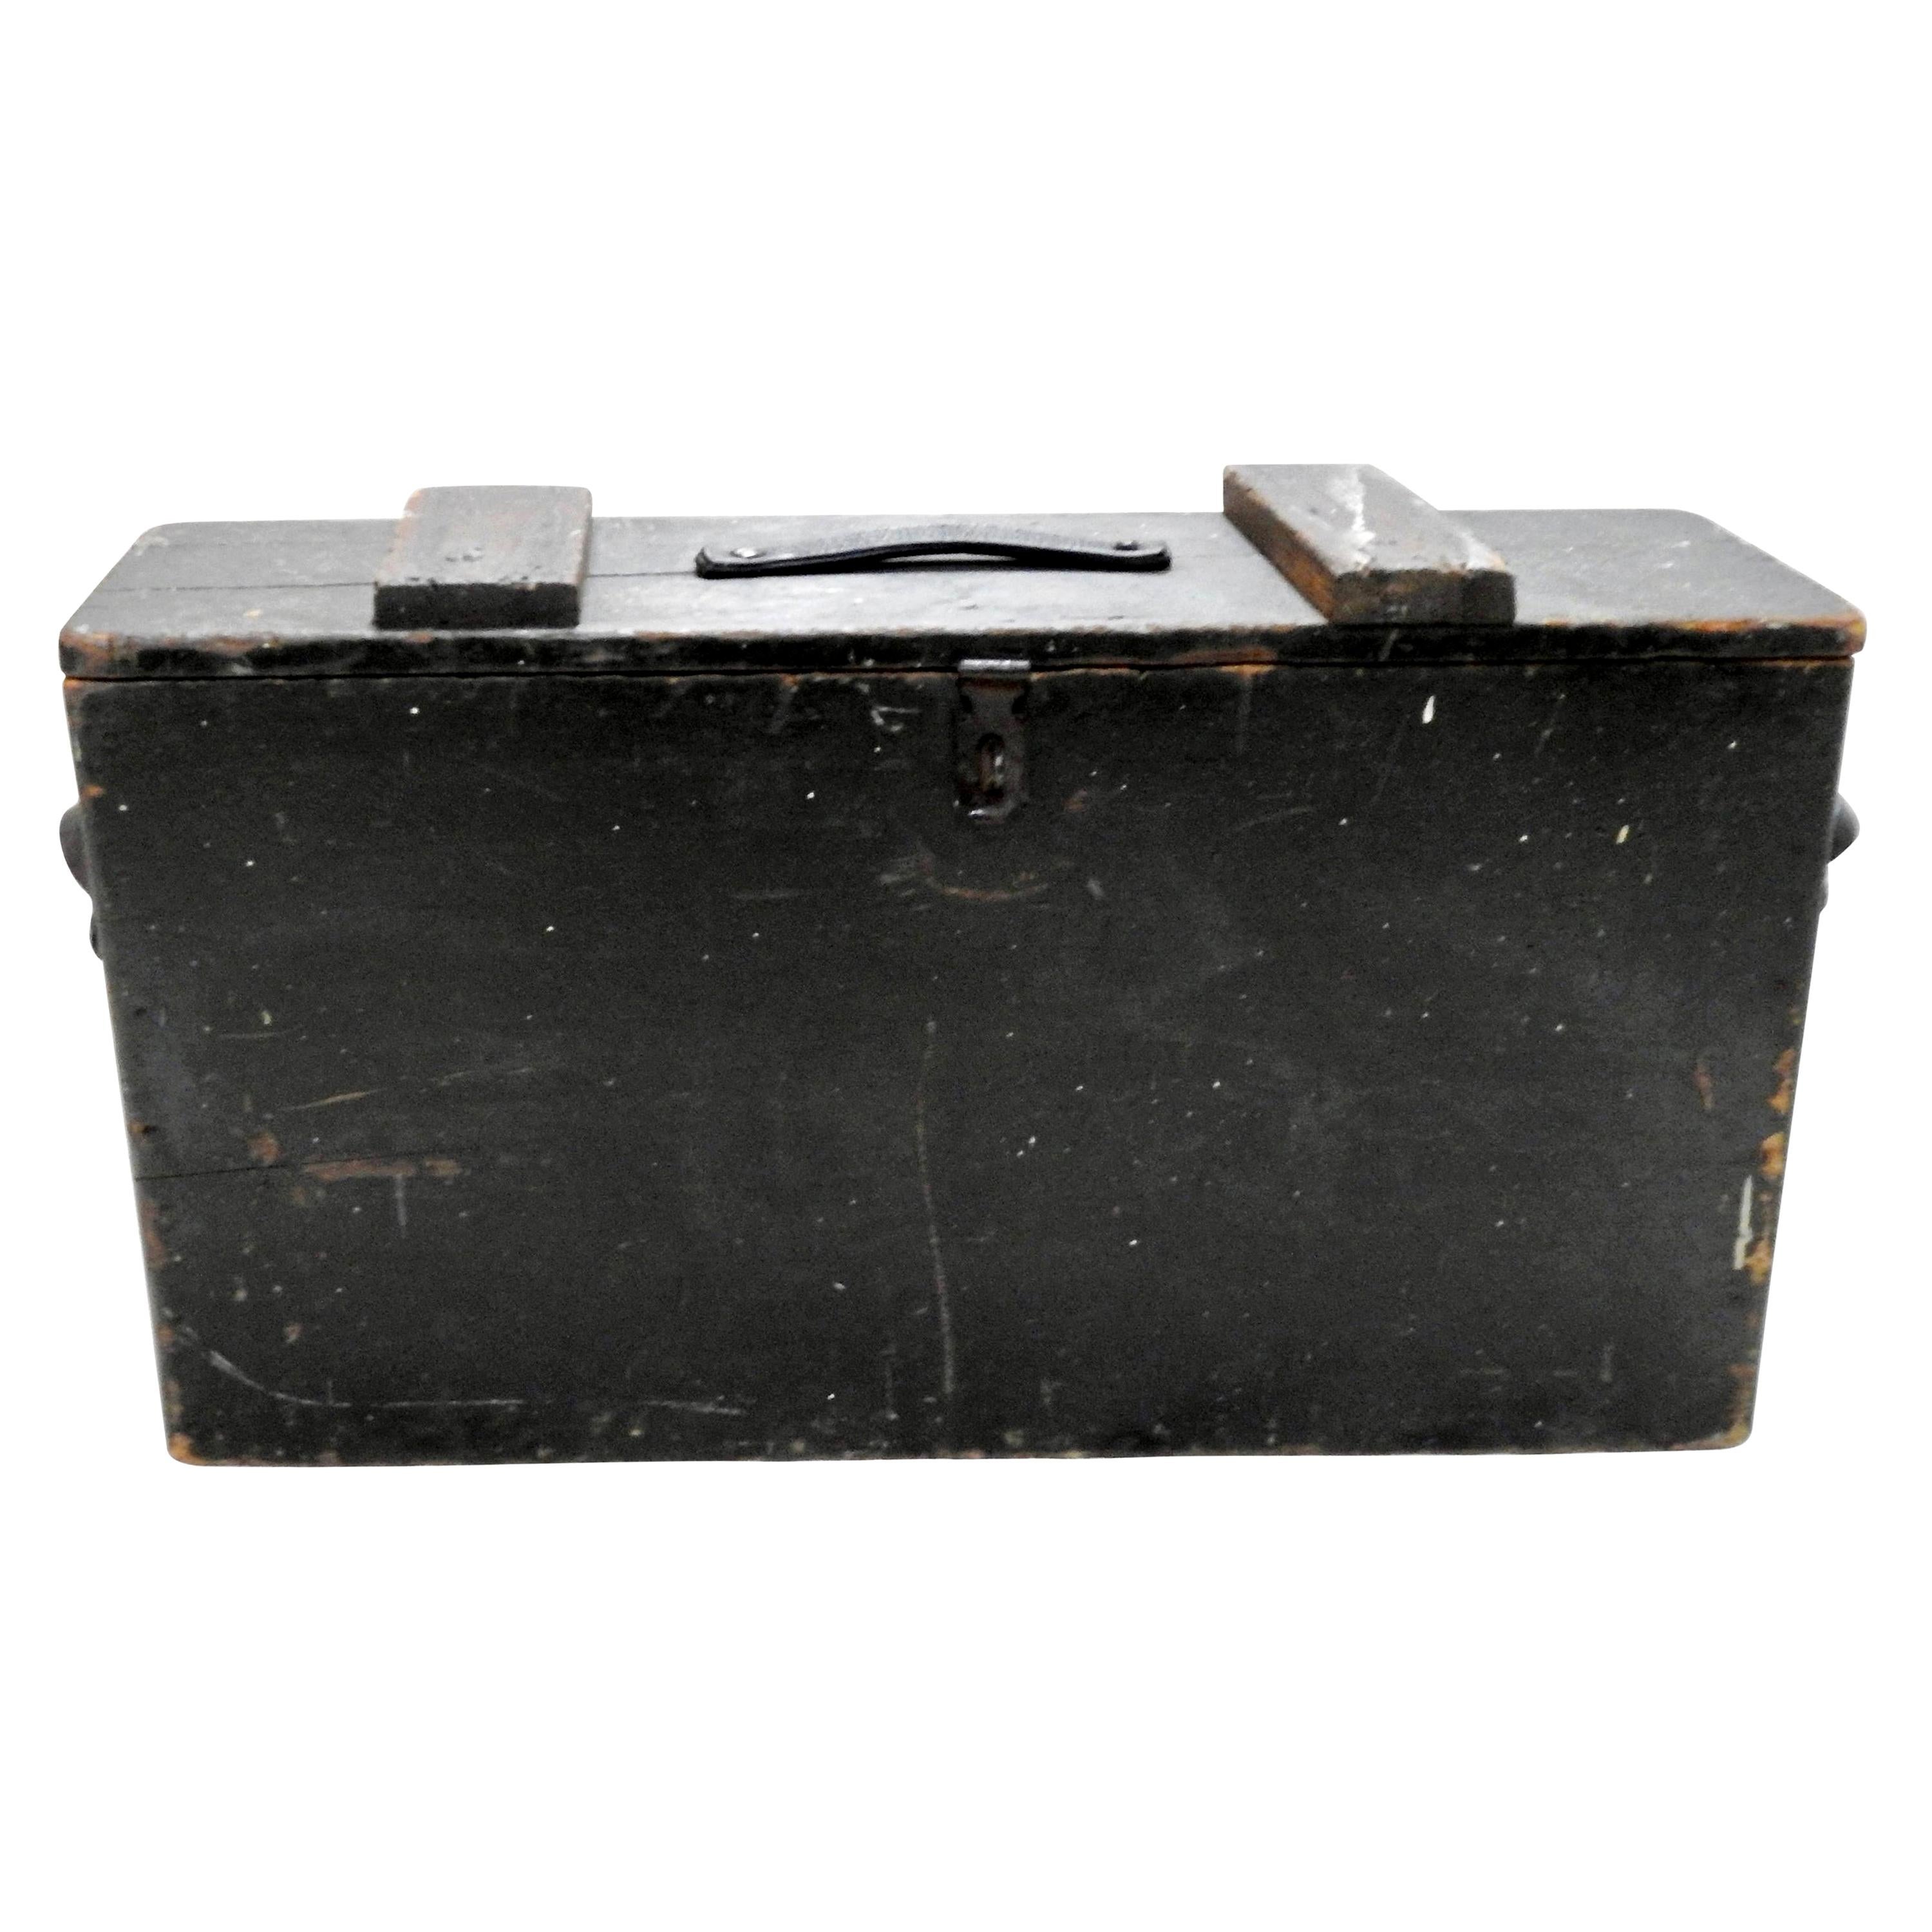 Tool Box Wooden with Leather Details Primitive For Sale